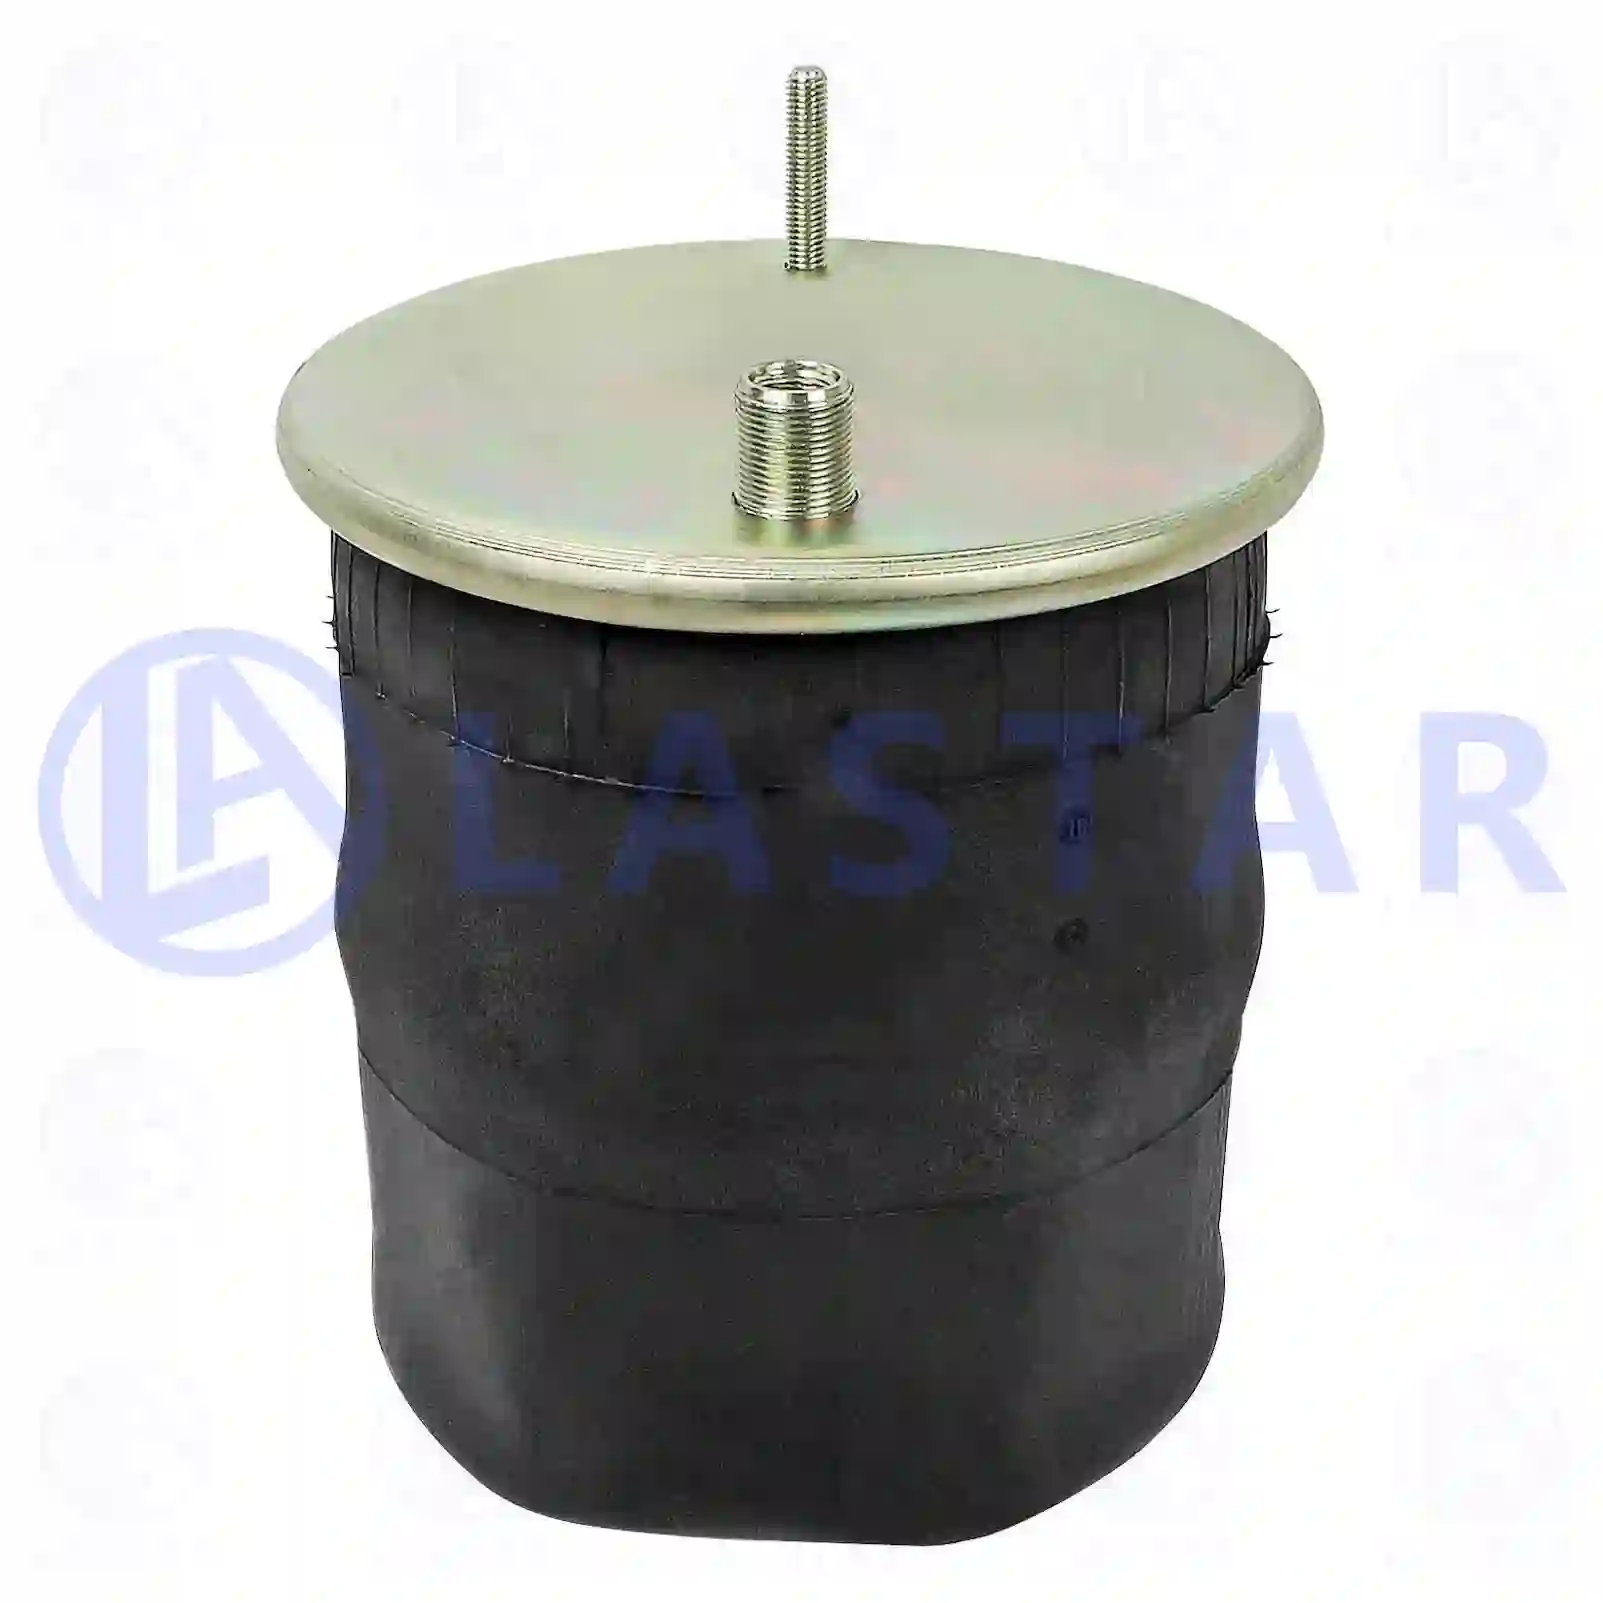 Air spring, with steel piston, 77729677, 21224751 ||  77729677 Lastar Spare Part | Truck Spare Parts, Auotomotive Spare Parts Air spring, with steel piston, 77729677, 21224751 ||  77729677 Lastar Spare Part | Truck Spare Parts, Auotomotive Spare Parts